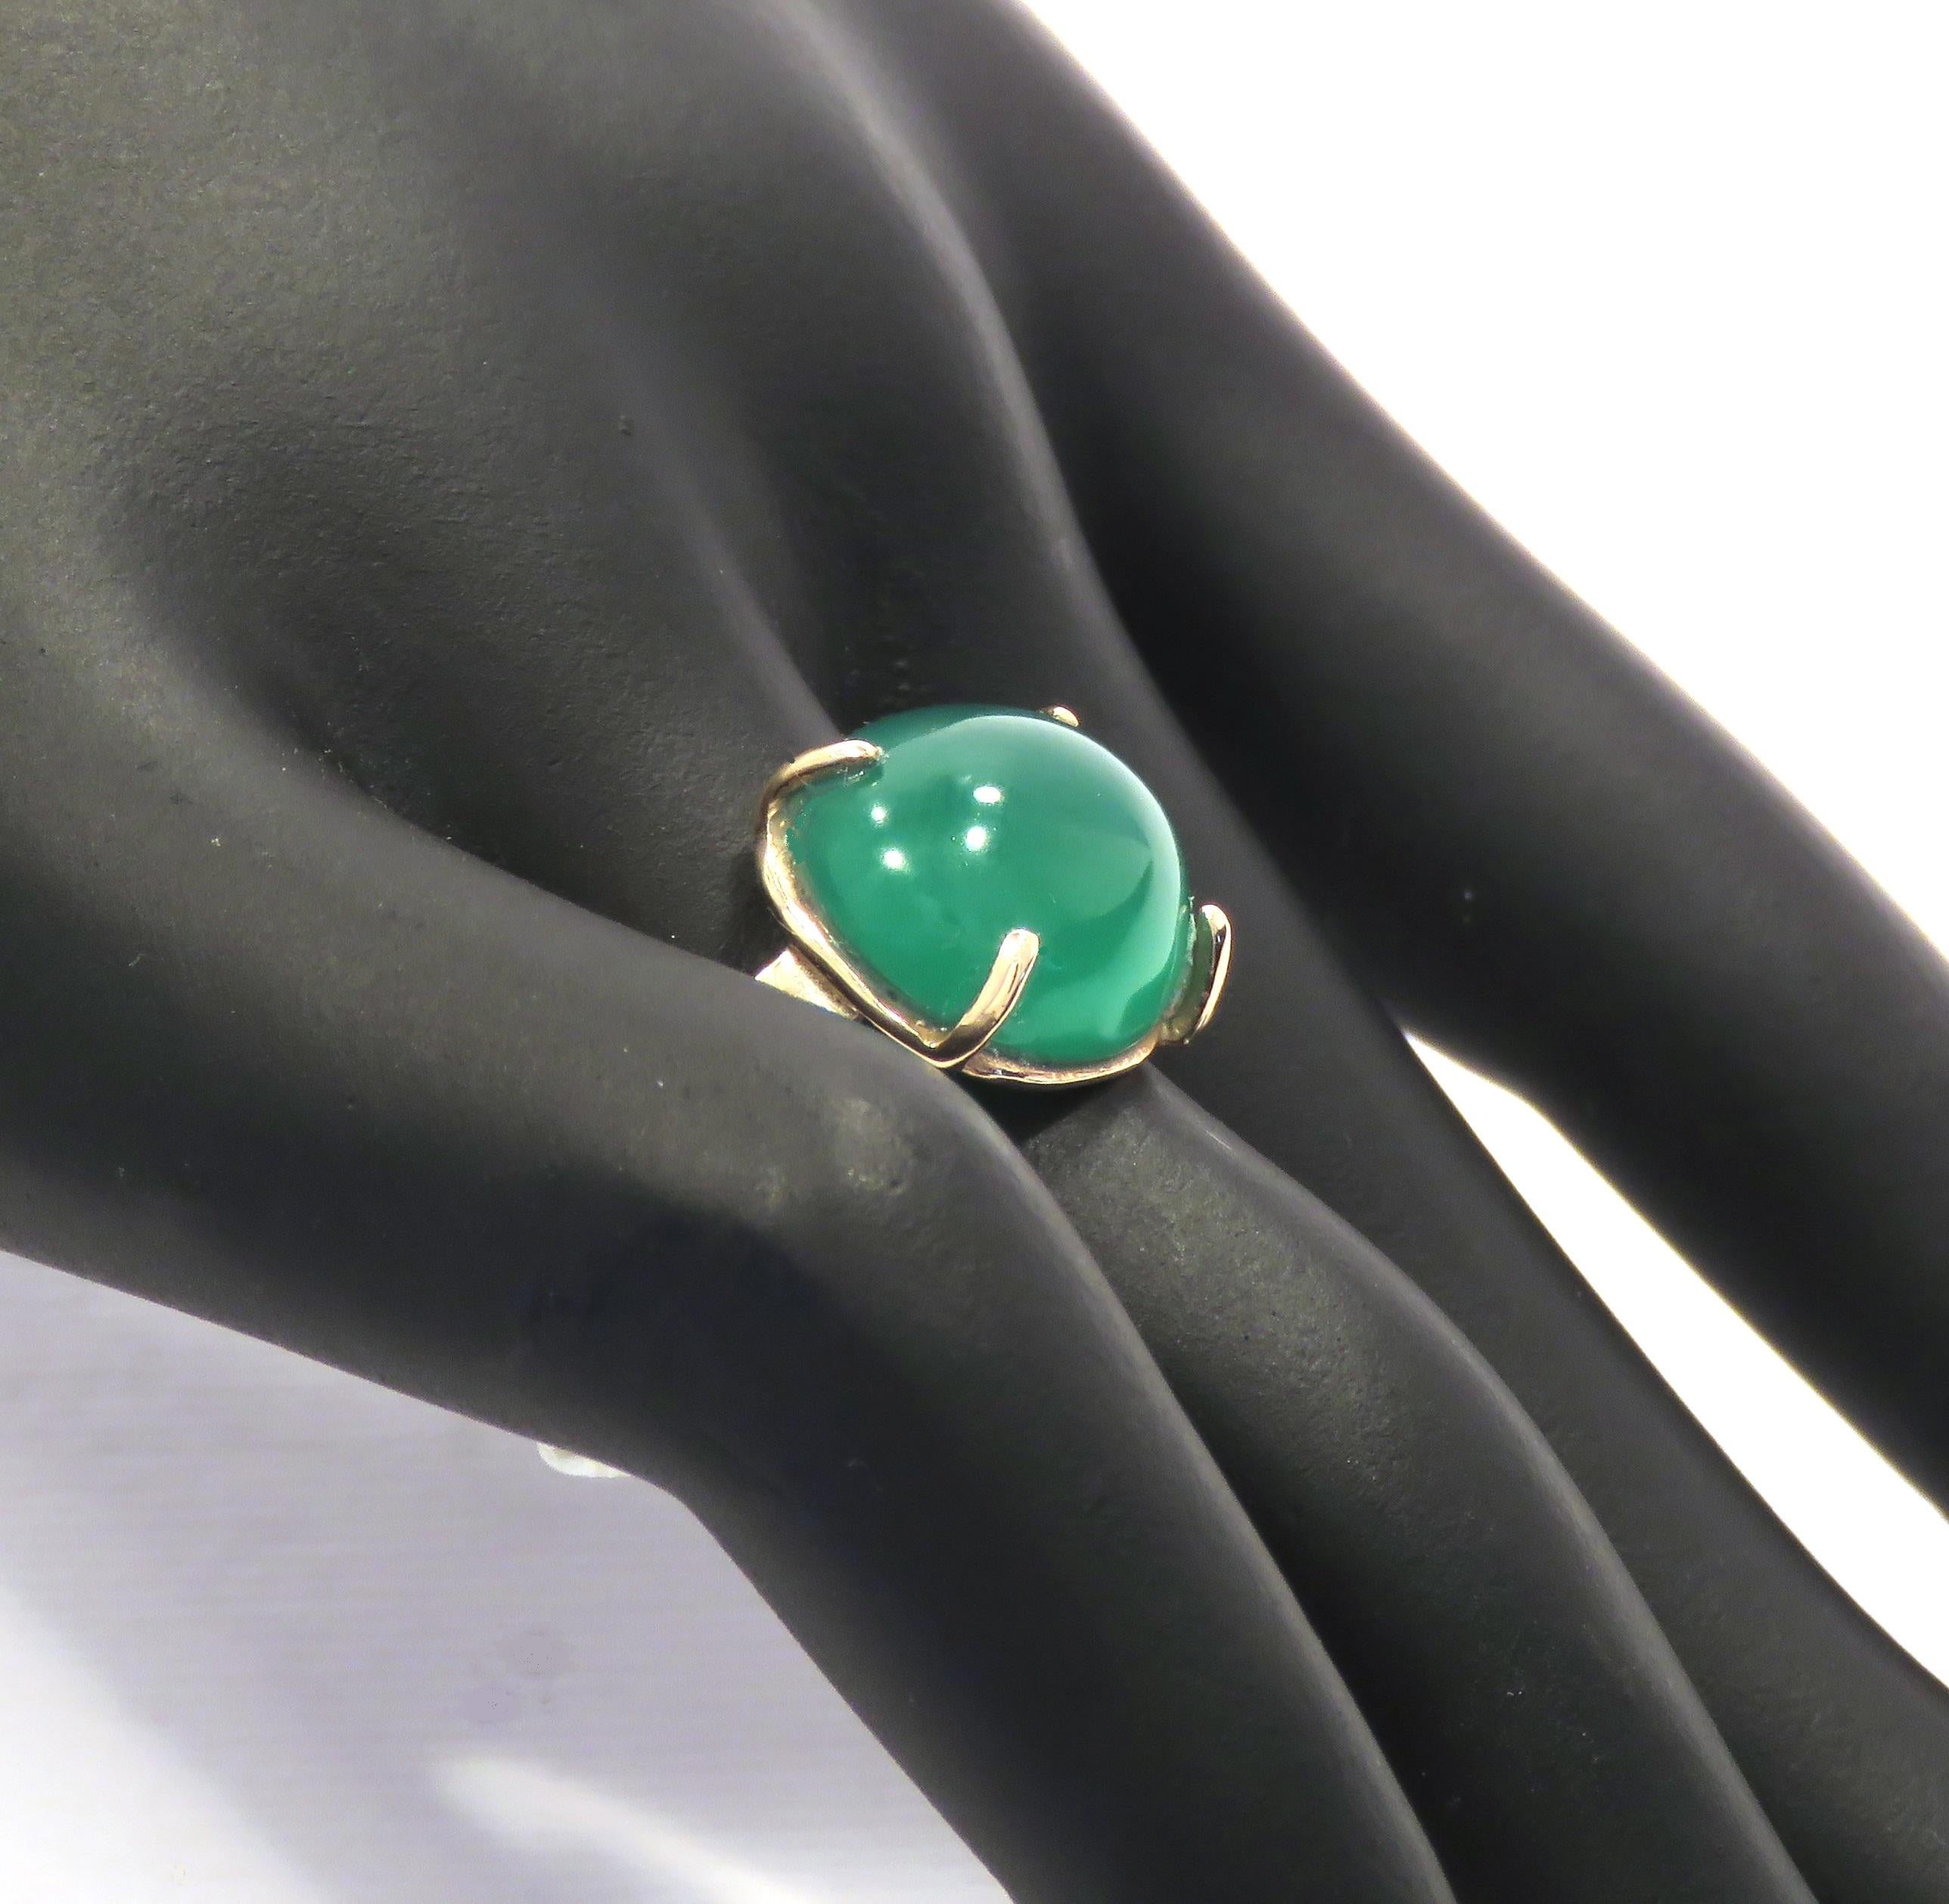 Beautiful green agate featured in a contemporary ring crafted in 9 karat rose gold. The green agate is cabochon cut  and oval shaped and is held by 4 claws, the stem is finished in hammered gold, this is completely done by hand. The size of the